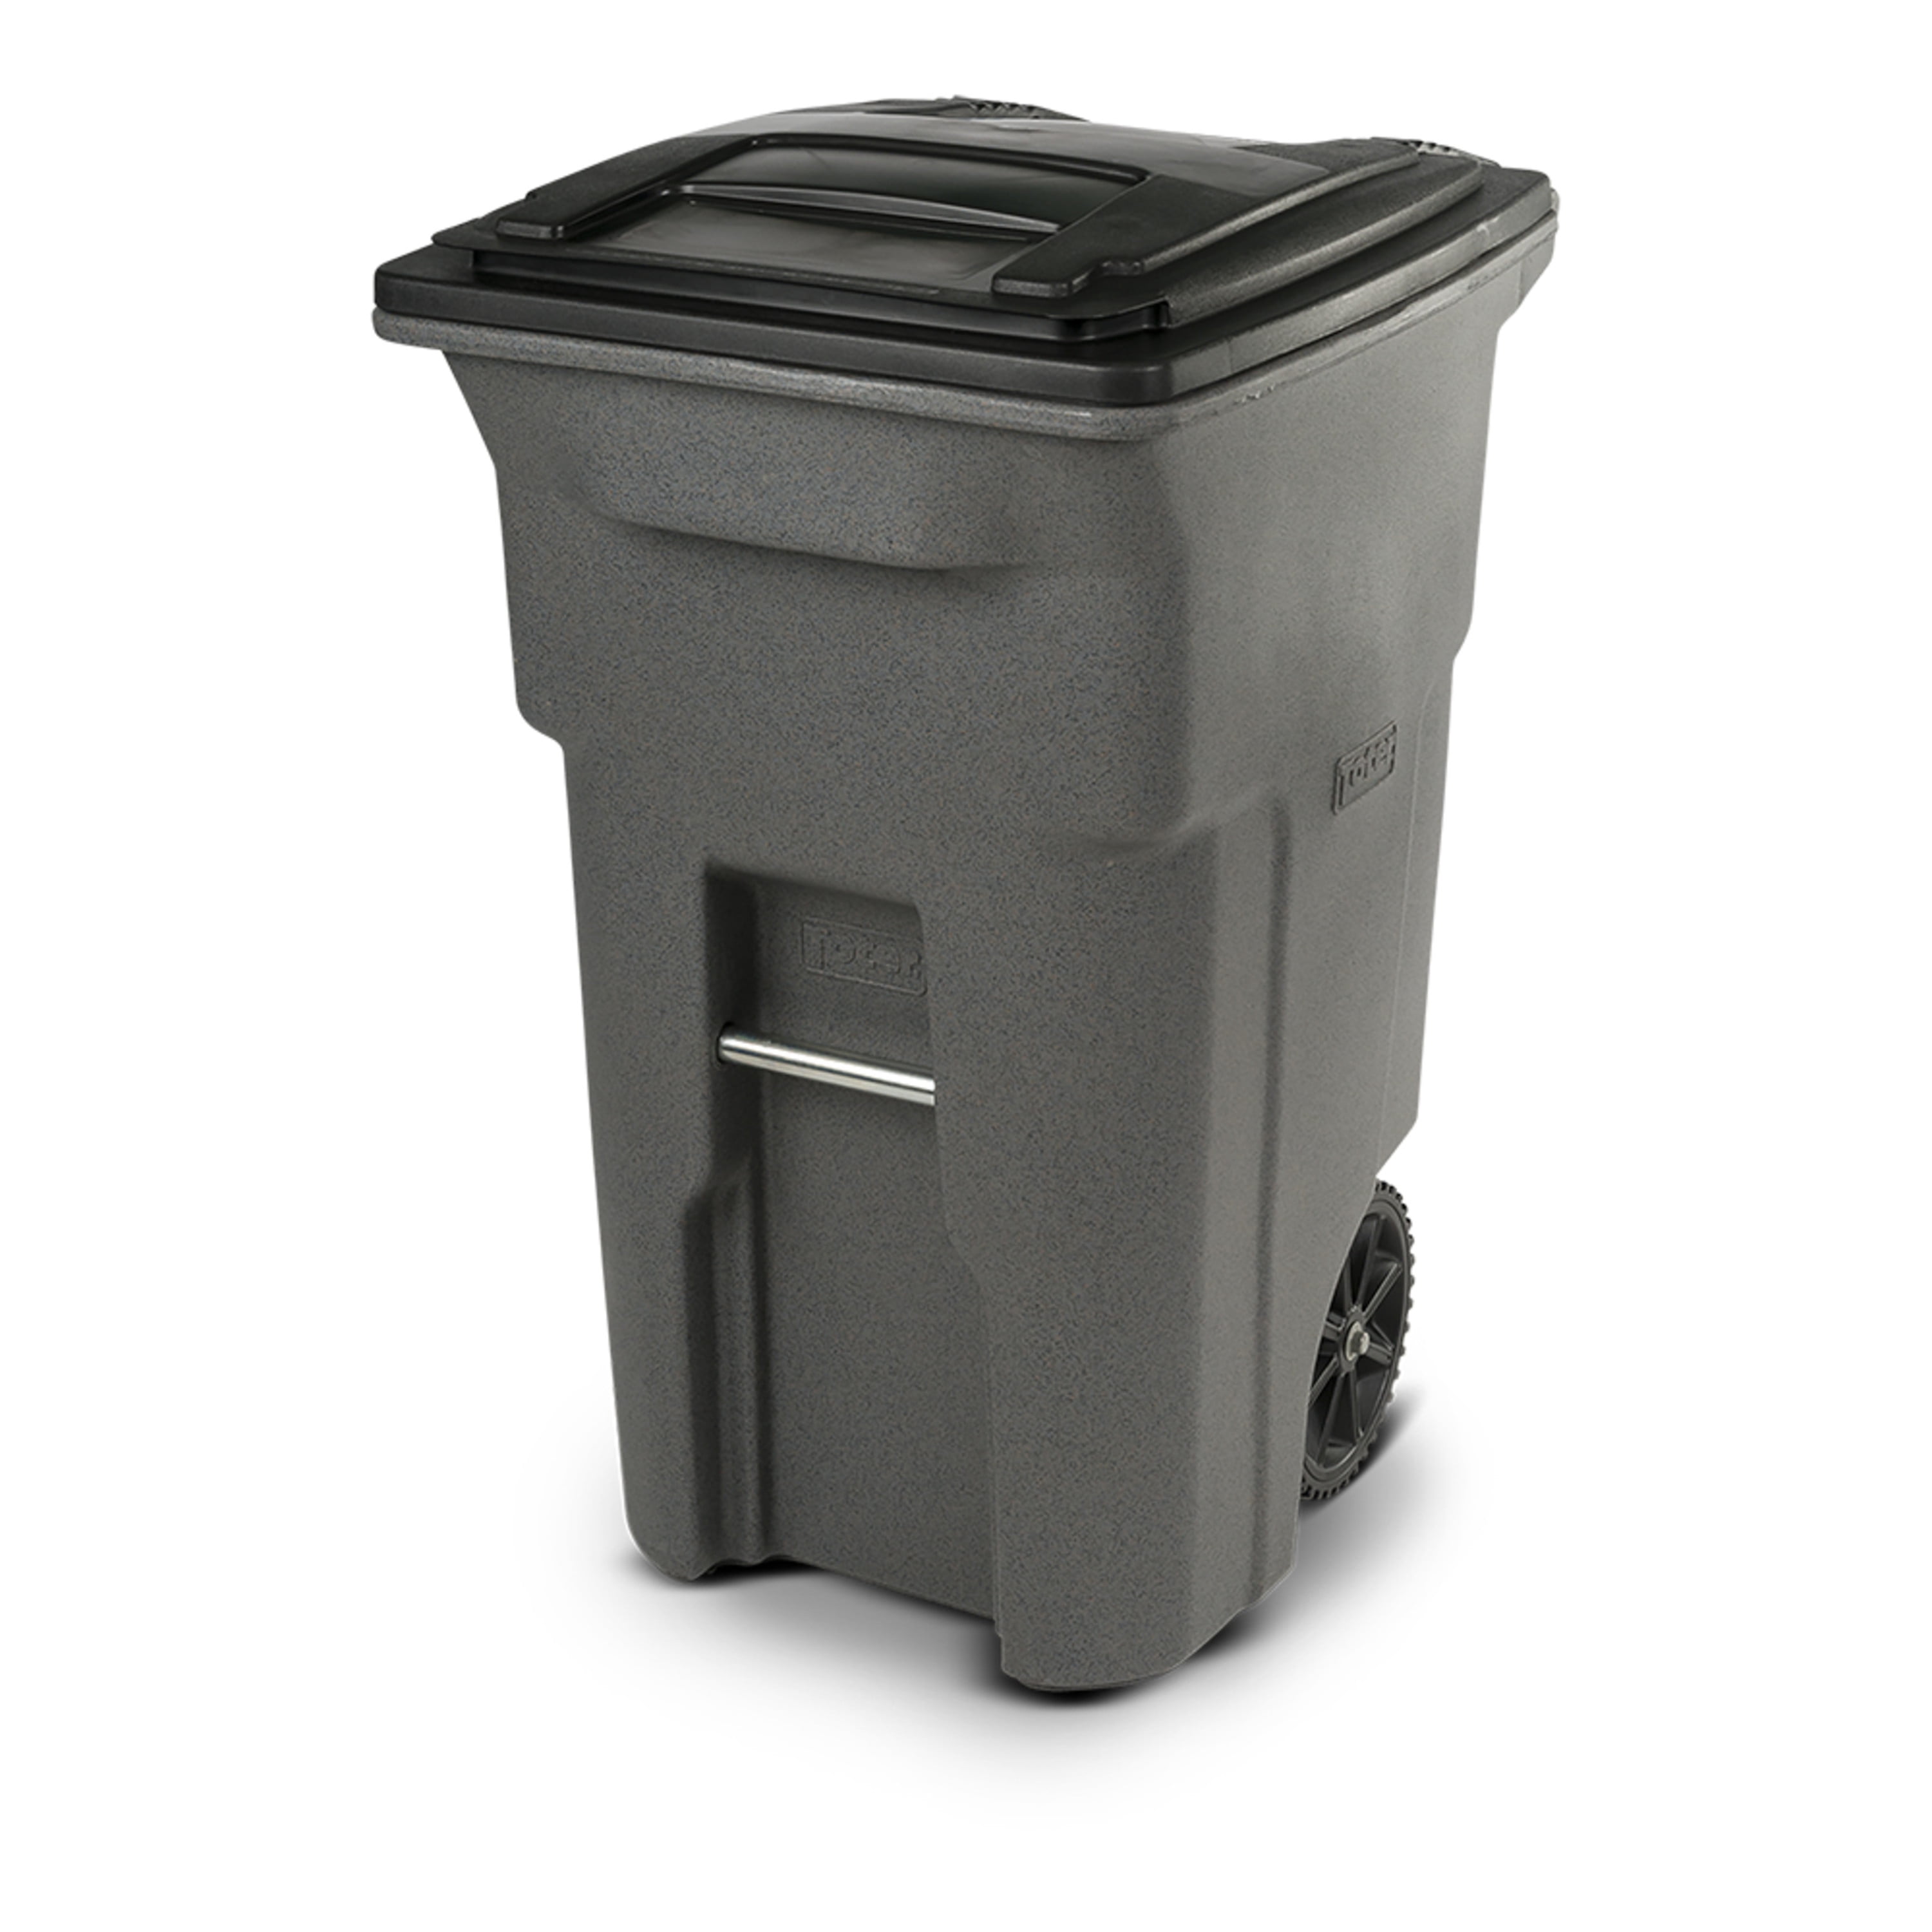 Uline Trash Can with Wheels - 95 Gallon, Green H-7938G - Uline